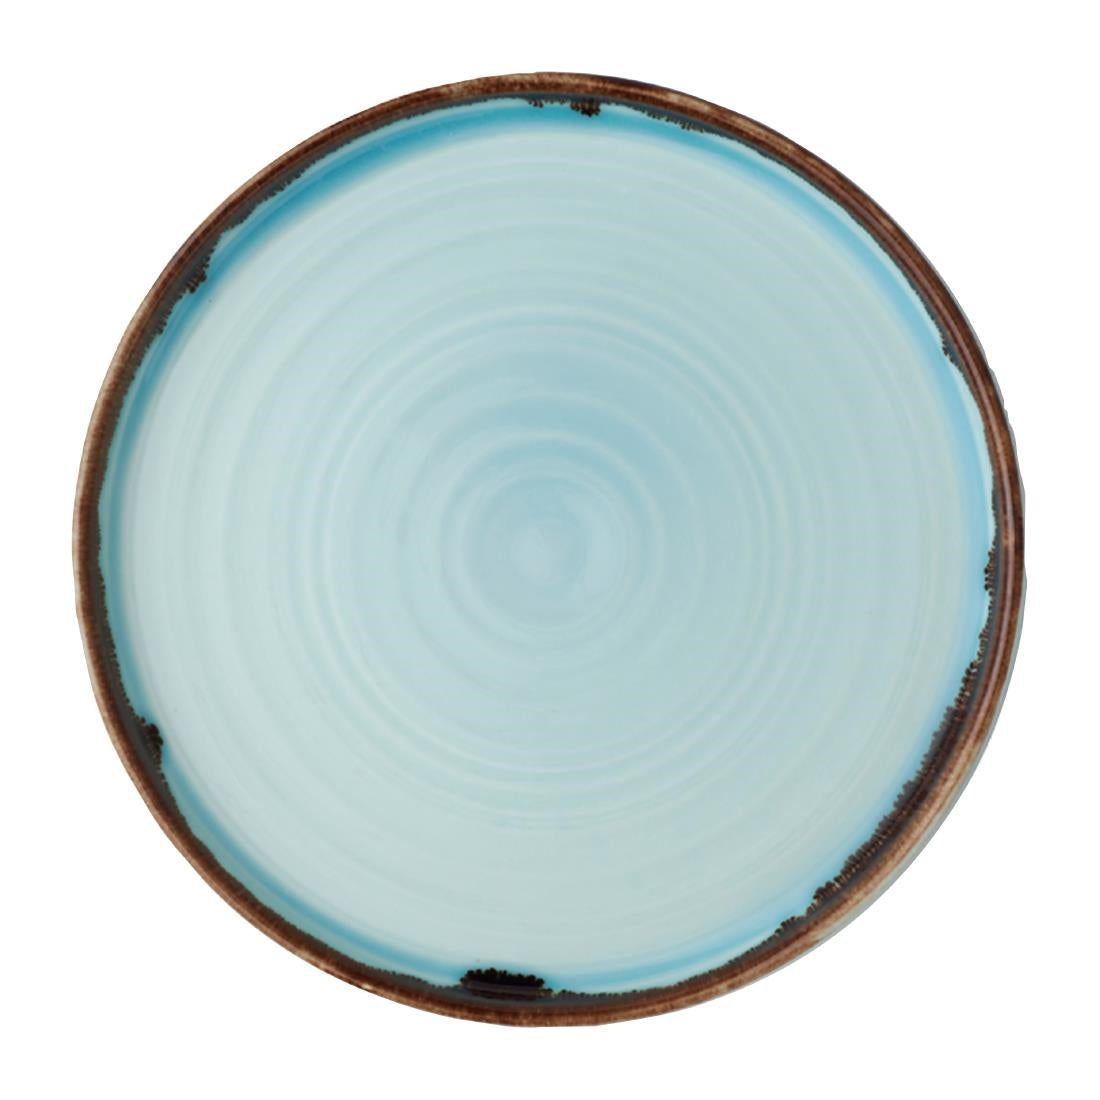 FX169 Dudson Harvest Walled Plates Turquoise 210mm (Pack of 6) JD Catering Equipment Solutions Ltd